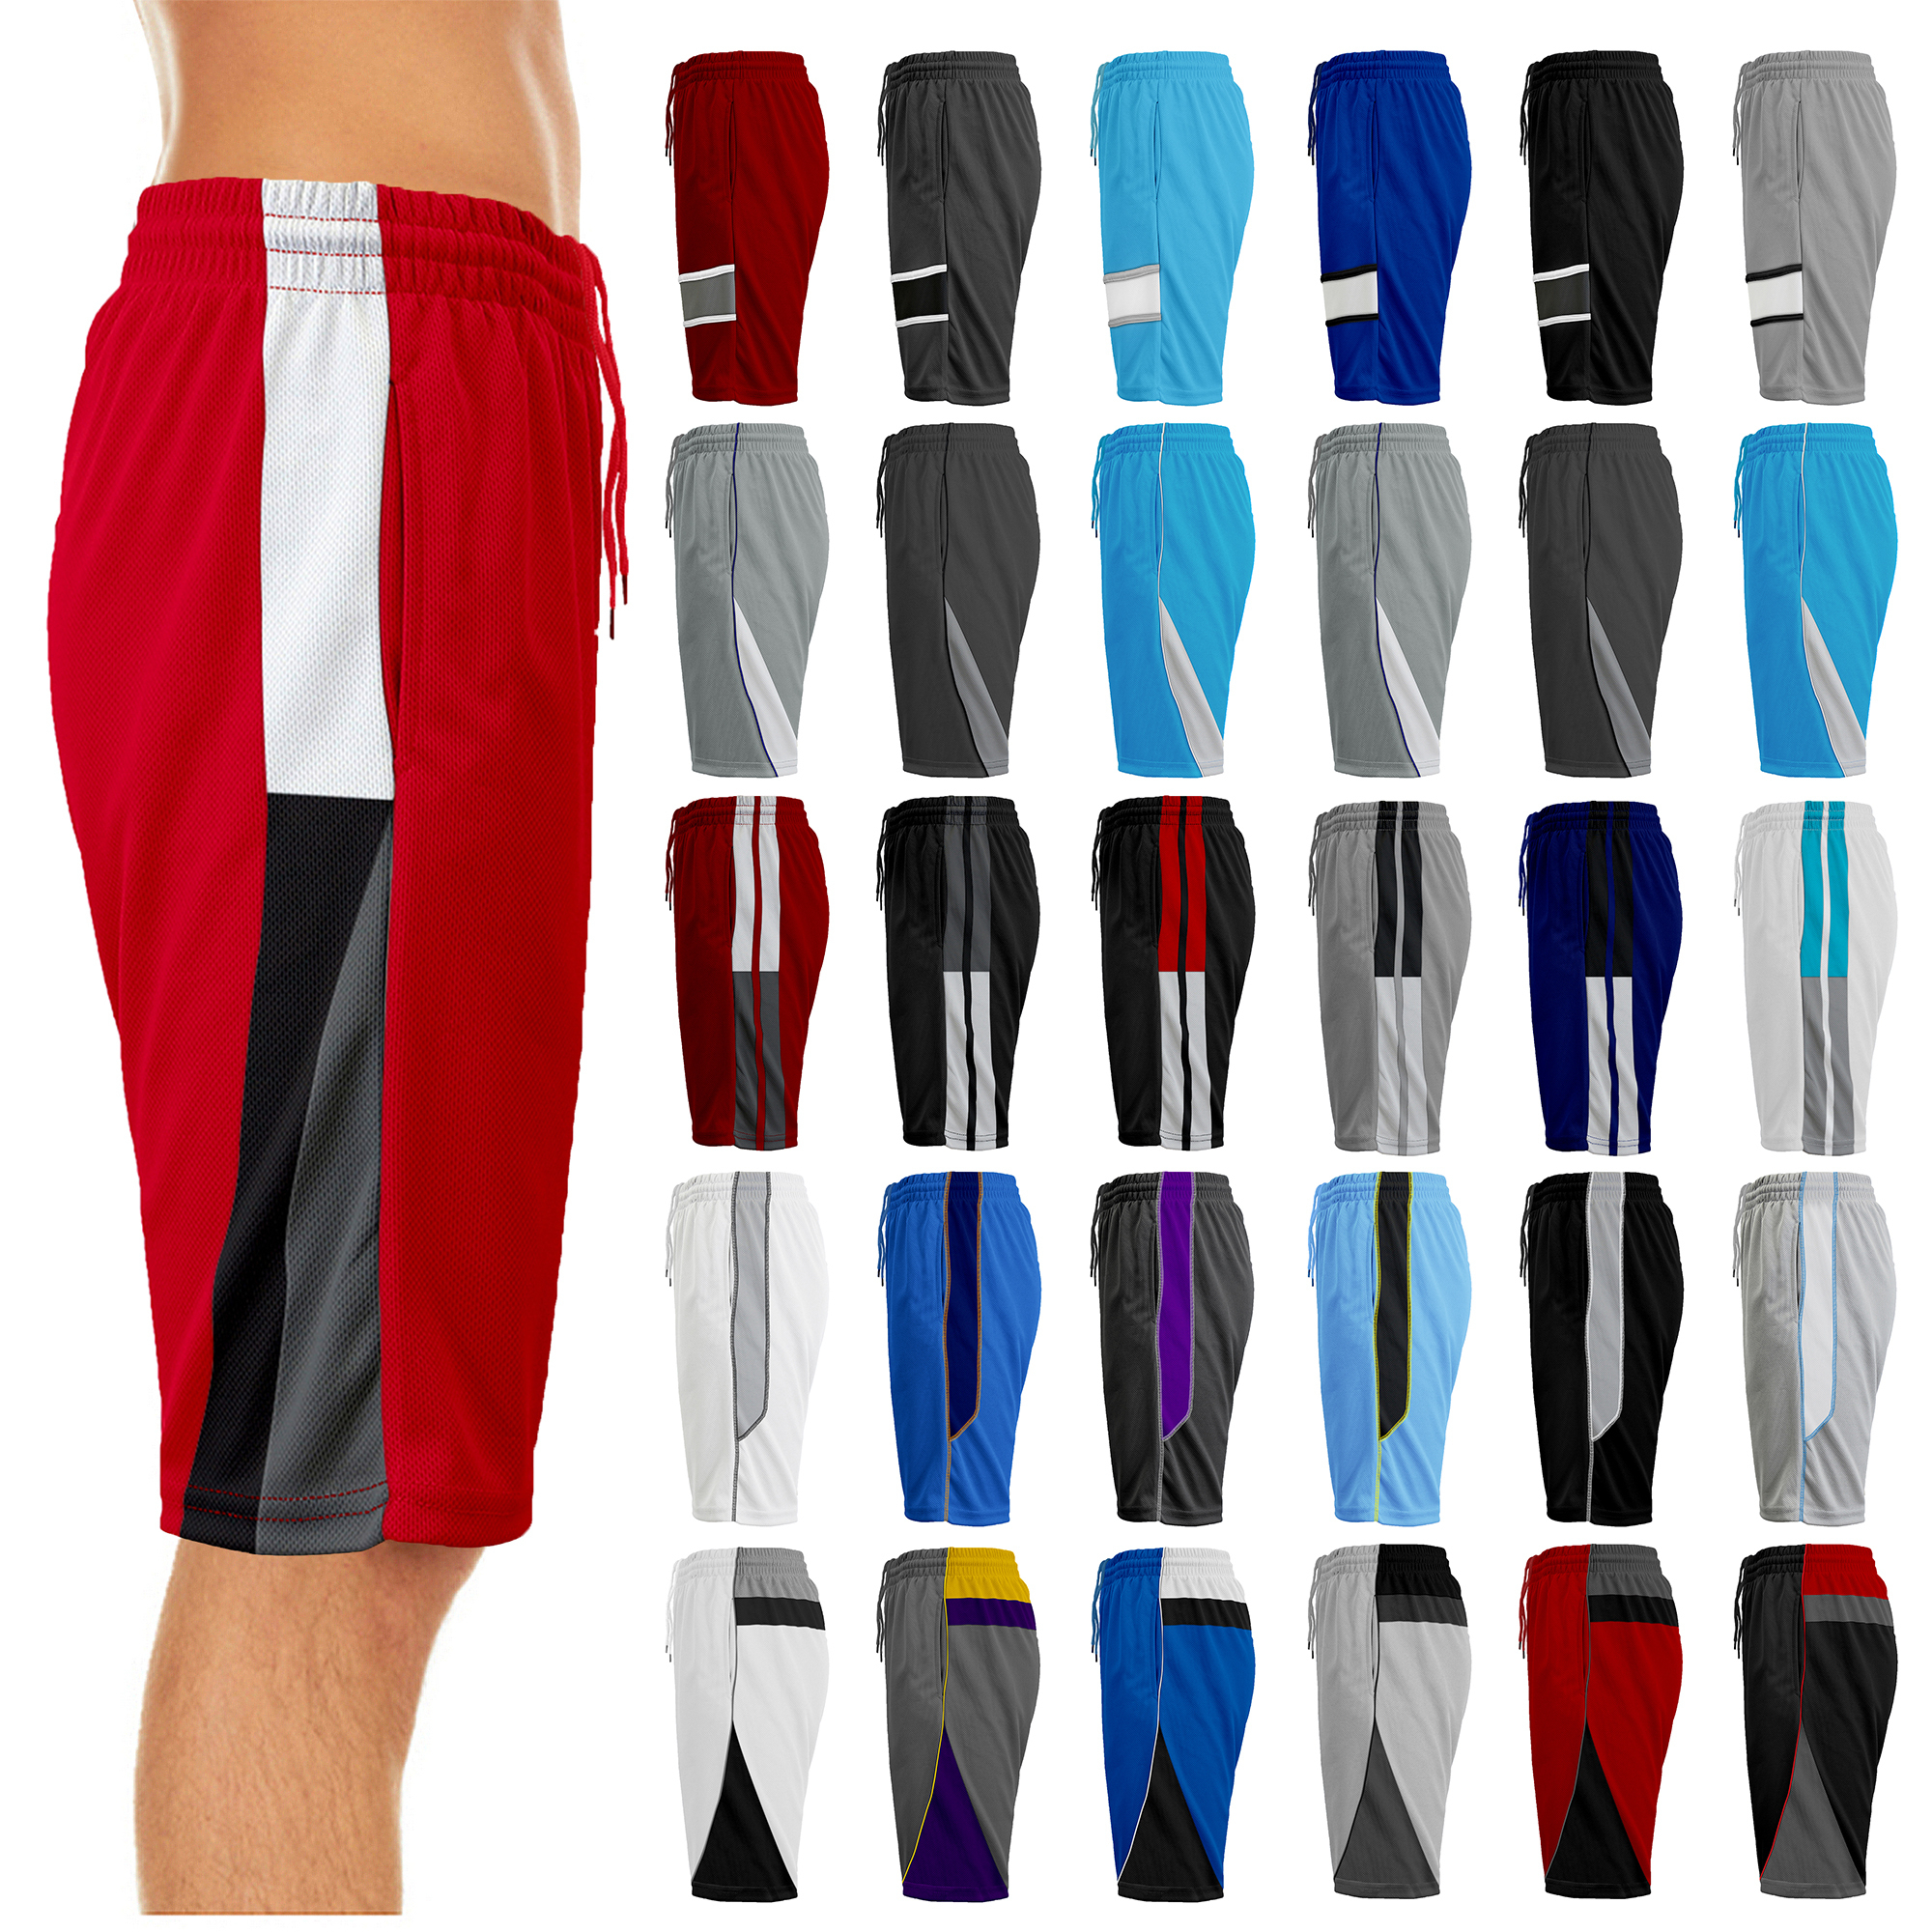 4-Pack: Men's Active Moisture-Wicking Mesh Performance Shorts (S-2XL) - Assorted Styles, X-Large